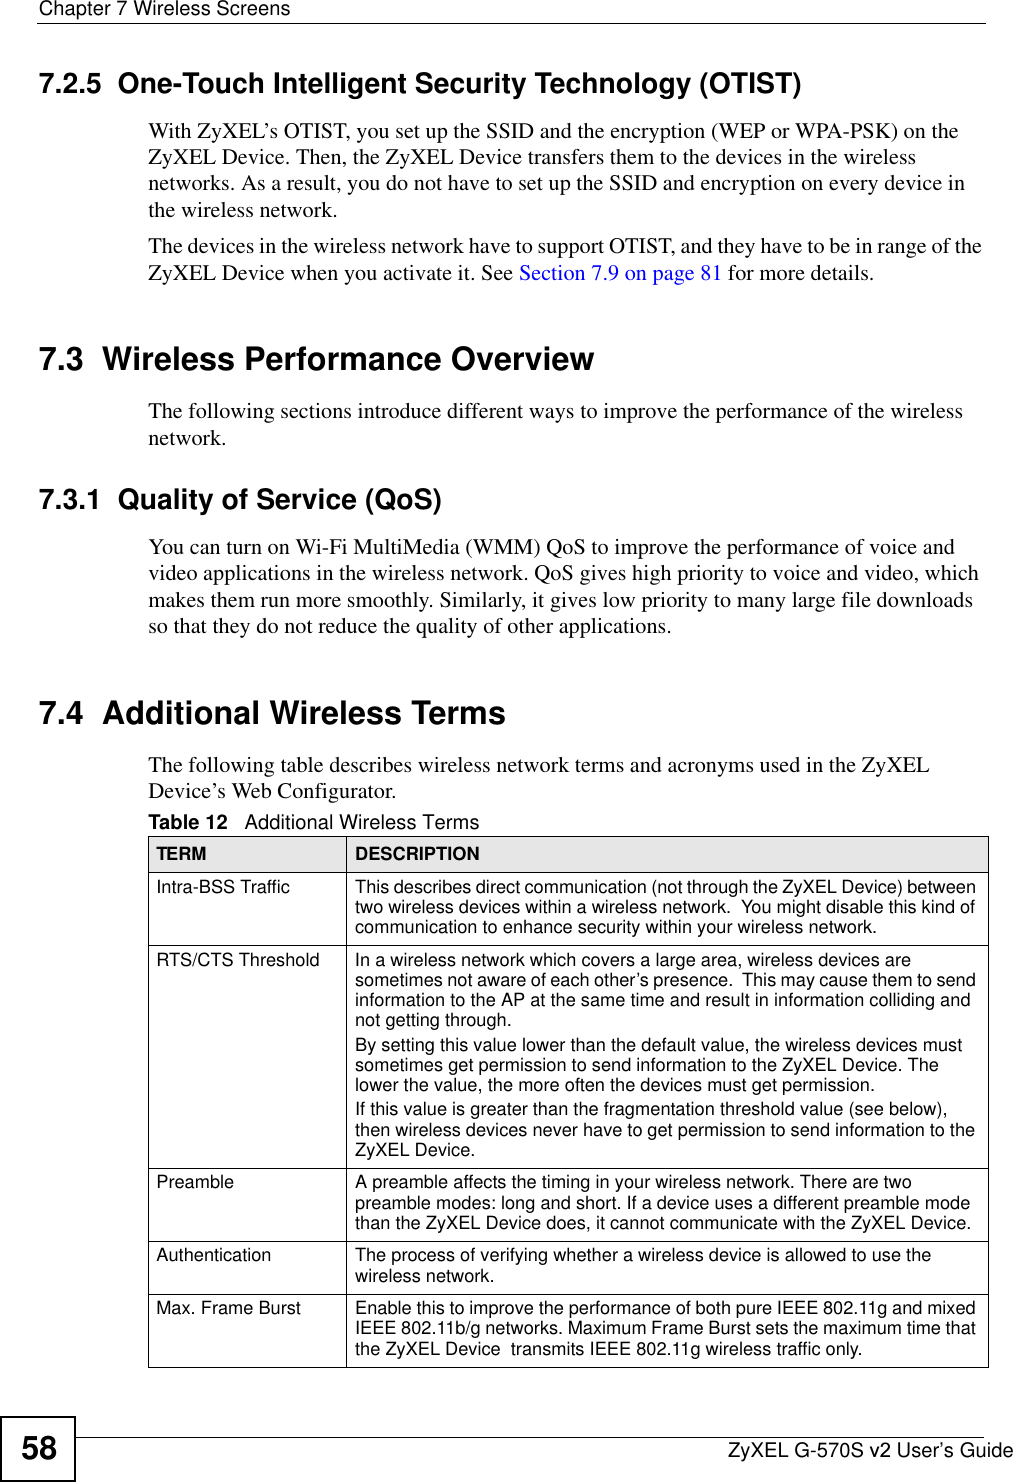 Chapter 7 Wireless ScreensZyXEL G-570S v2 User’s Guide587.2.5  One-Touch Intelligent Security Technology (OTIST)With ZyXEL’s OTIST, you set up the SSID and the encryption (WEP or WPA-PSK) on the ZyXEL Device. Then, the ZyXEL Device transfers them to the devices in the wireless networks. As a result, you do not have to set up the SSID and encryption on every device in the wireless network.The devices in the wireless network have to support OTIST, and they have to be in range of the ZyXEL Device when you activate it. See Section 7.9 on page 81 for more details.7.3  Wireless Performance OverviewThe following sections introduce different ways to improve the performance of the wireless network.7.3.1  Quality of Service (QoS)You can turn on Wi-Fi MultiMedia (WMM) QoS to improve the performance of voice and video applications in the wireless network. QoS gives high priority to voice and video, which makes them run more smoothly. Similarly, it gives low priority to many large file downloads so that they do not reduce the quality of other applications.7.4  Additional Wireless TermsThe following table describes wireless network terms and acronyms used in the ZyXEL Device’s Web Configurator.Table 12   Additional Wireless TermsTERM DESCRIPTIONIntra-BSS Traffic This describes direct communication (not through the ZyXEL Device) between two wireless devices within a wireless network.  You might disable this kind of communication to enhance security within your wireless network.RTS/CTS Threshold In a wireless network which covers a large area, wireless devices are sometimes not aware of each other’s presence.  This may cause them to send information to the AP at the same time and result in information colliding and not getting through.By setting this value lower than the default value, the wireless devices must sometimes get permission to send information to the ZyXEL Device. The lower the value, the more often the devices must get permission.If this value is greater than the fragmentation threshold value (see below), then wireless devices never have to get permission to send information to the ZyXEL Device.Preamble A preamble affects the timing in your wireless network. There are two preamble modes: long and short. If a device uses a different preamble mode than the ZyXEL Device does, it cannot communicate with the ZyXEL Device.Authentication The process of verifying whether a wireless device is allowed to use the wireless network.Max. Frame Burst Enable this to improve the performance of both pure IEEE 802.11g and mixed IEEE 802.11b/g networks. Maximum Frame Burst sets the maximum time that the ZyXEL Device  transmits IEEE 802.11g wireless traffic only.